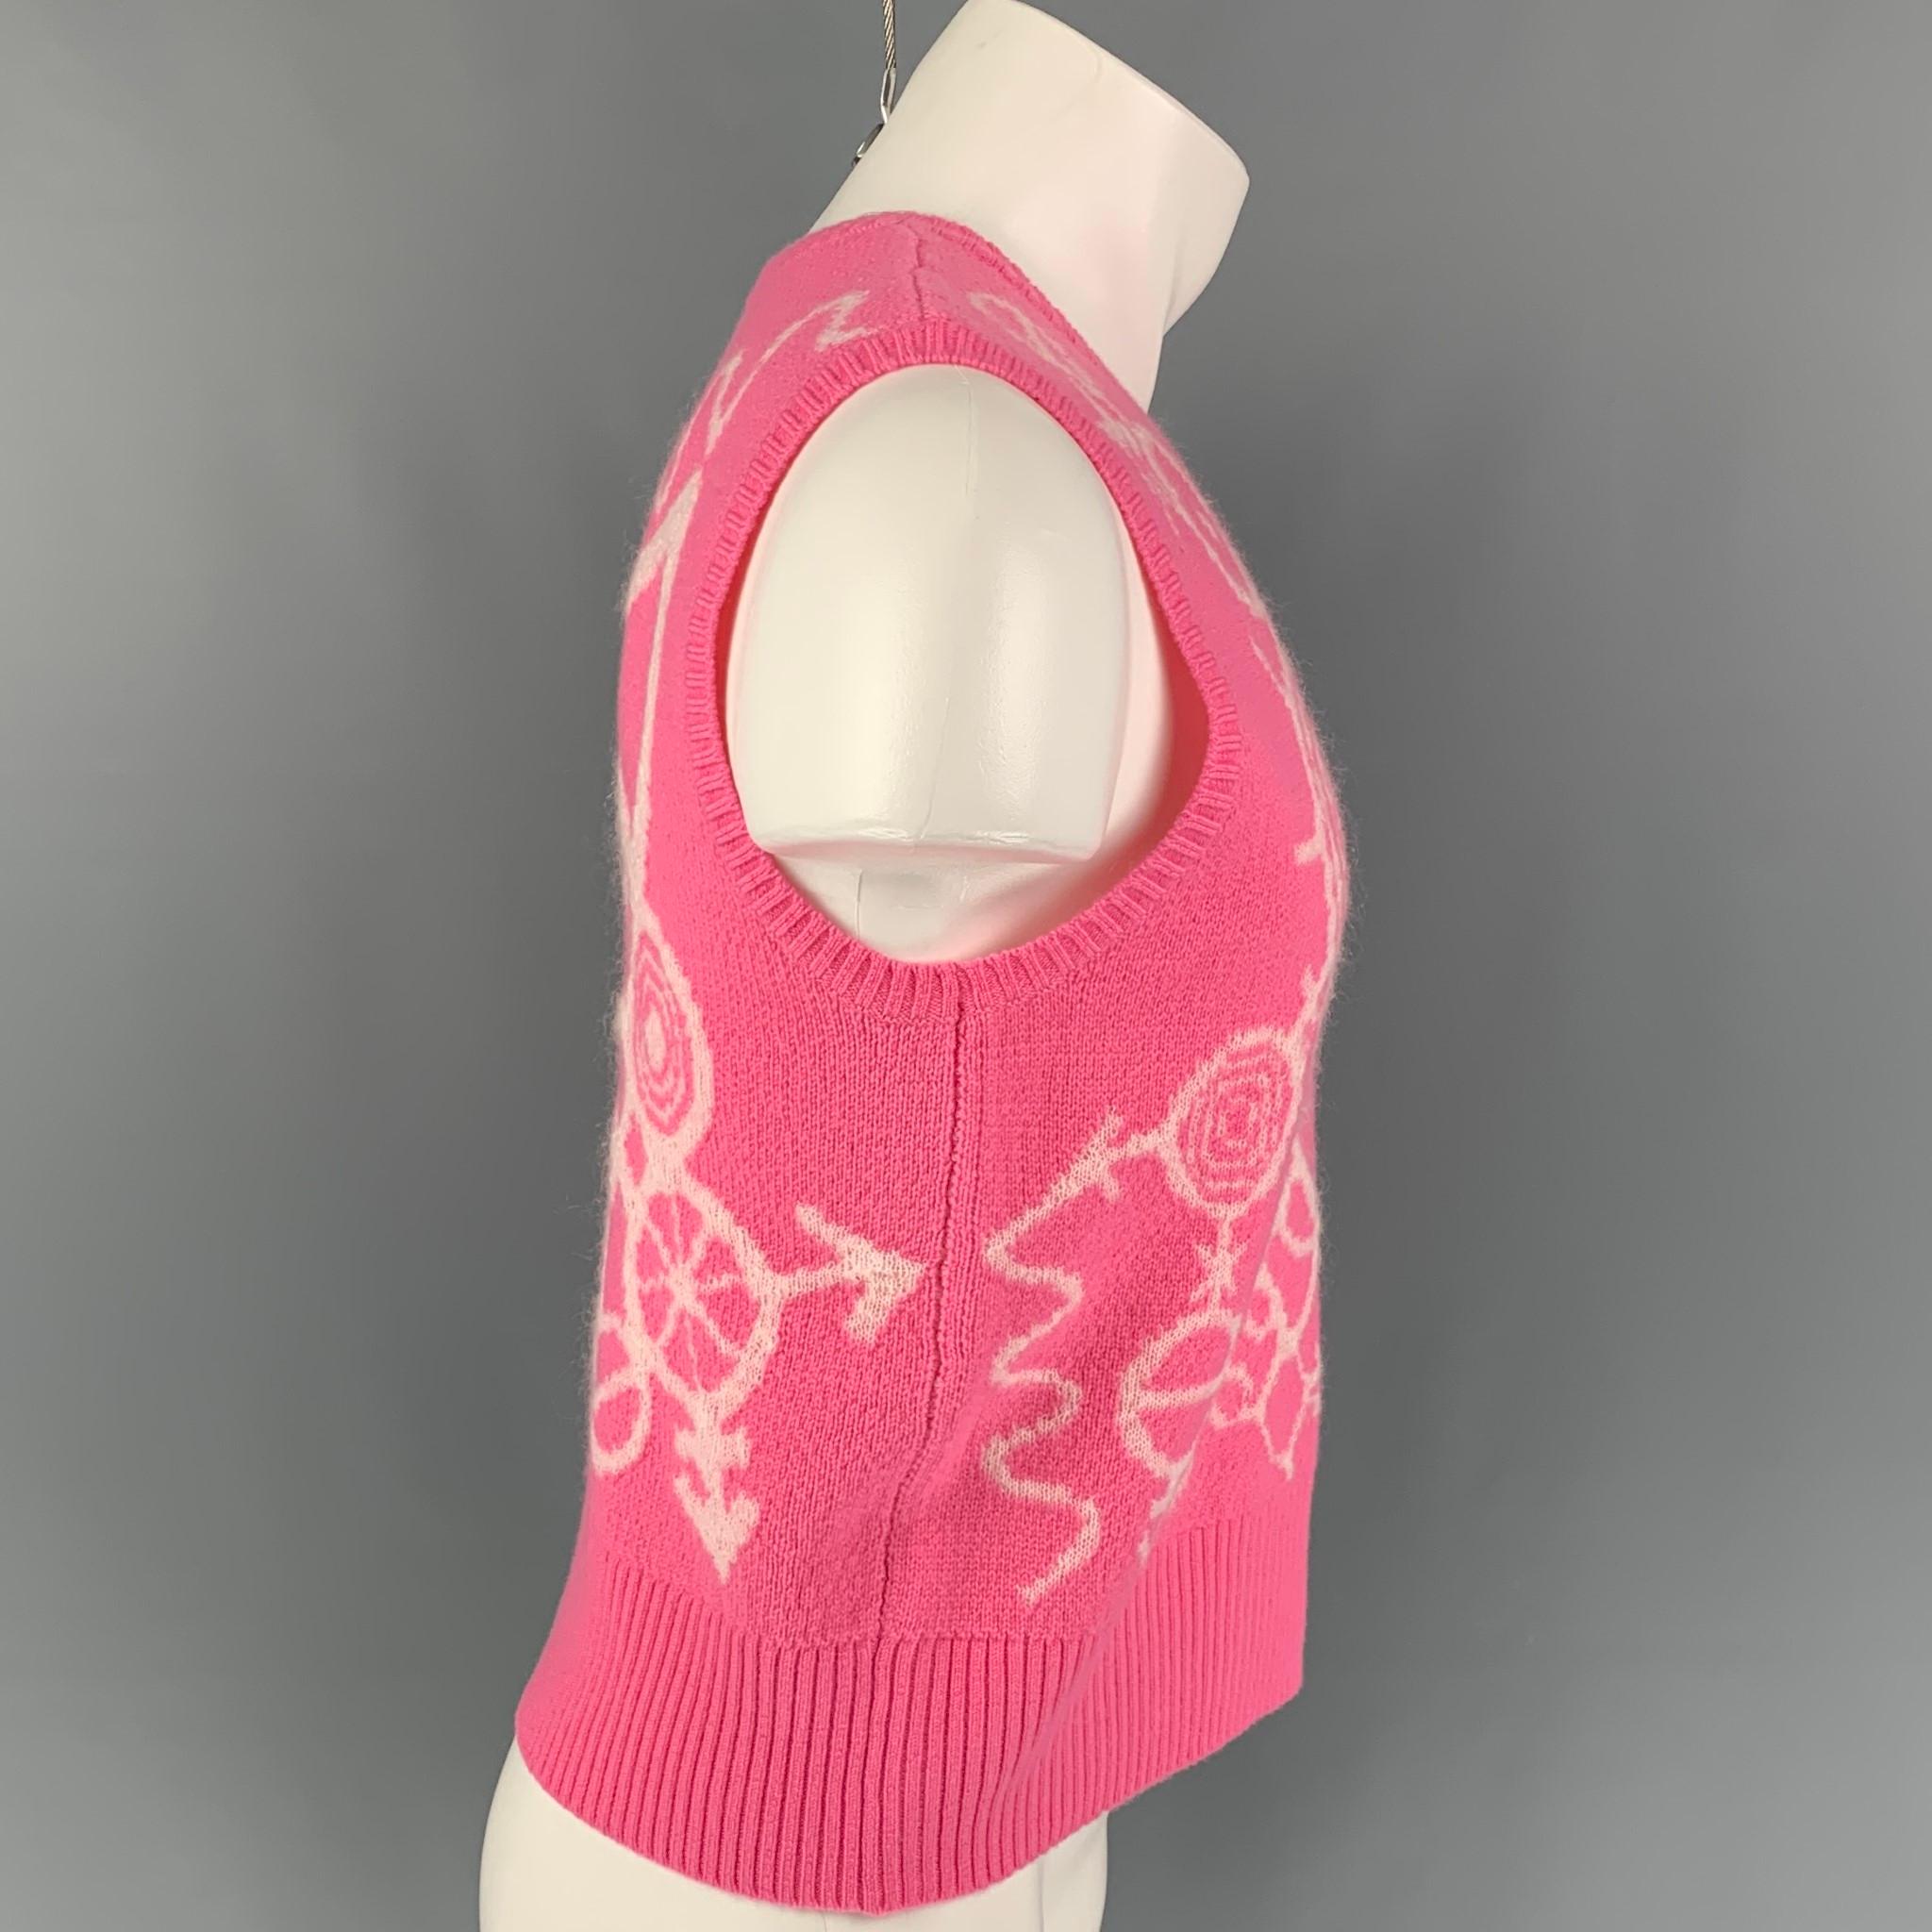 LOVERBOY by CHARLES JEFFREY vest comes in a pink & white merino wool with a front mohair heart design featuring a cropped style and a crew-neck. 

Excellent Pre-Owned Condition.
Marked: M

Measurements:

Shoulder: 15 in.
Chest: 38 in.
Length: 20.5